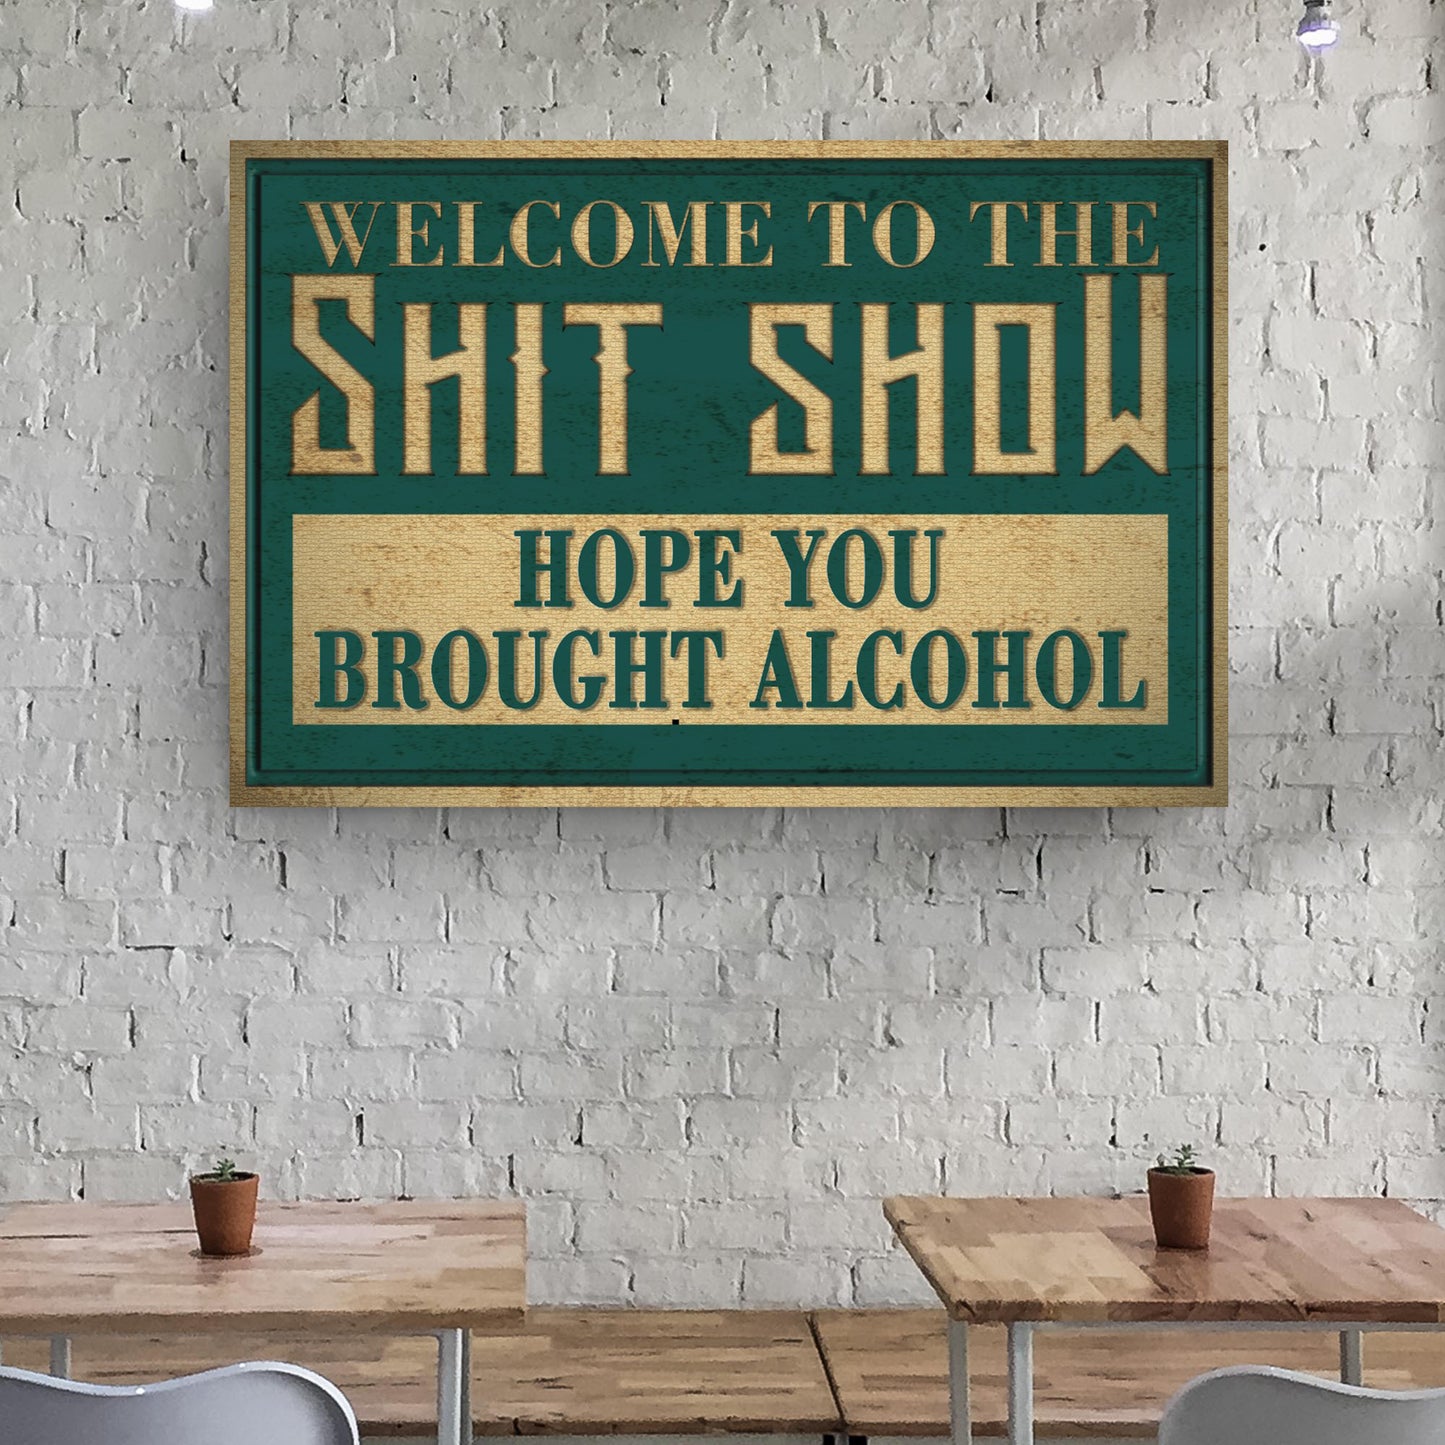 Hope You Brought Alcohol Sign - Image by Tailored Canvases